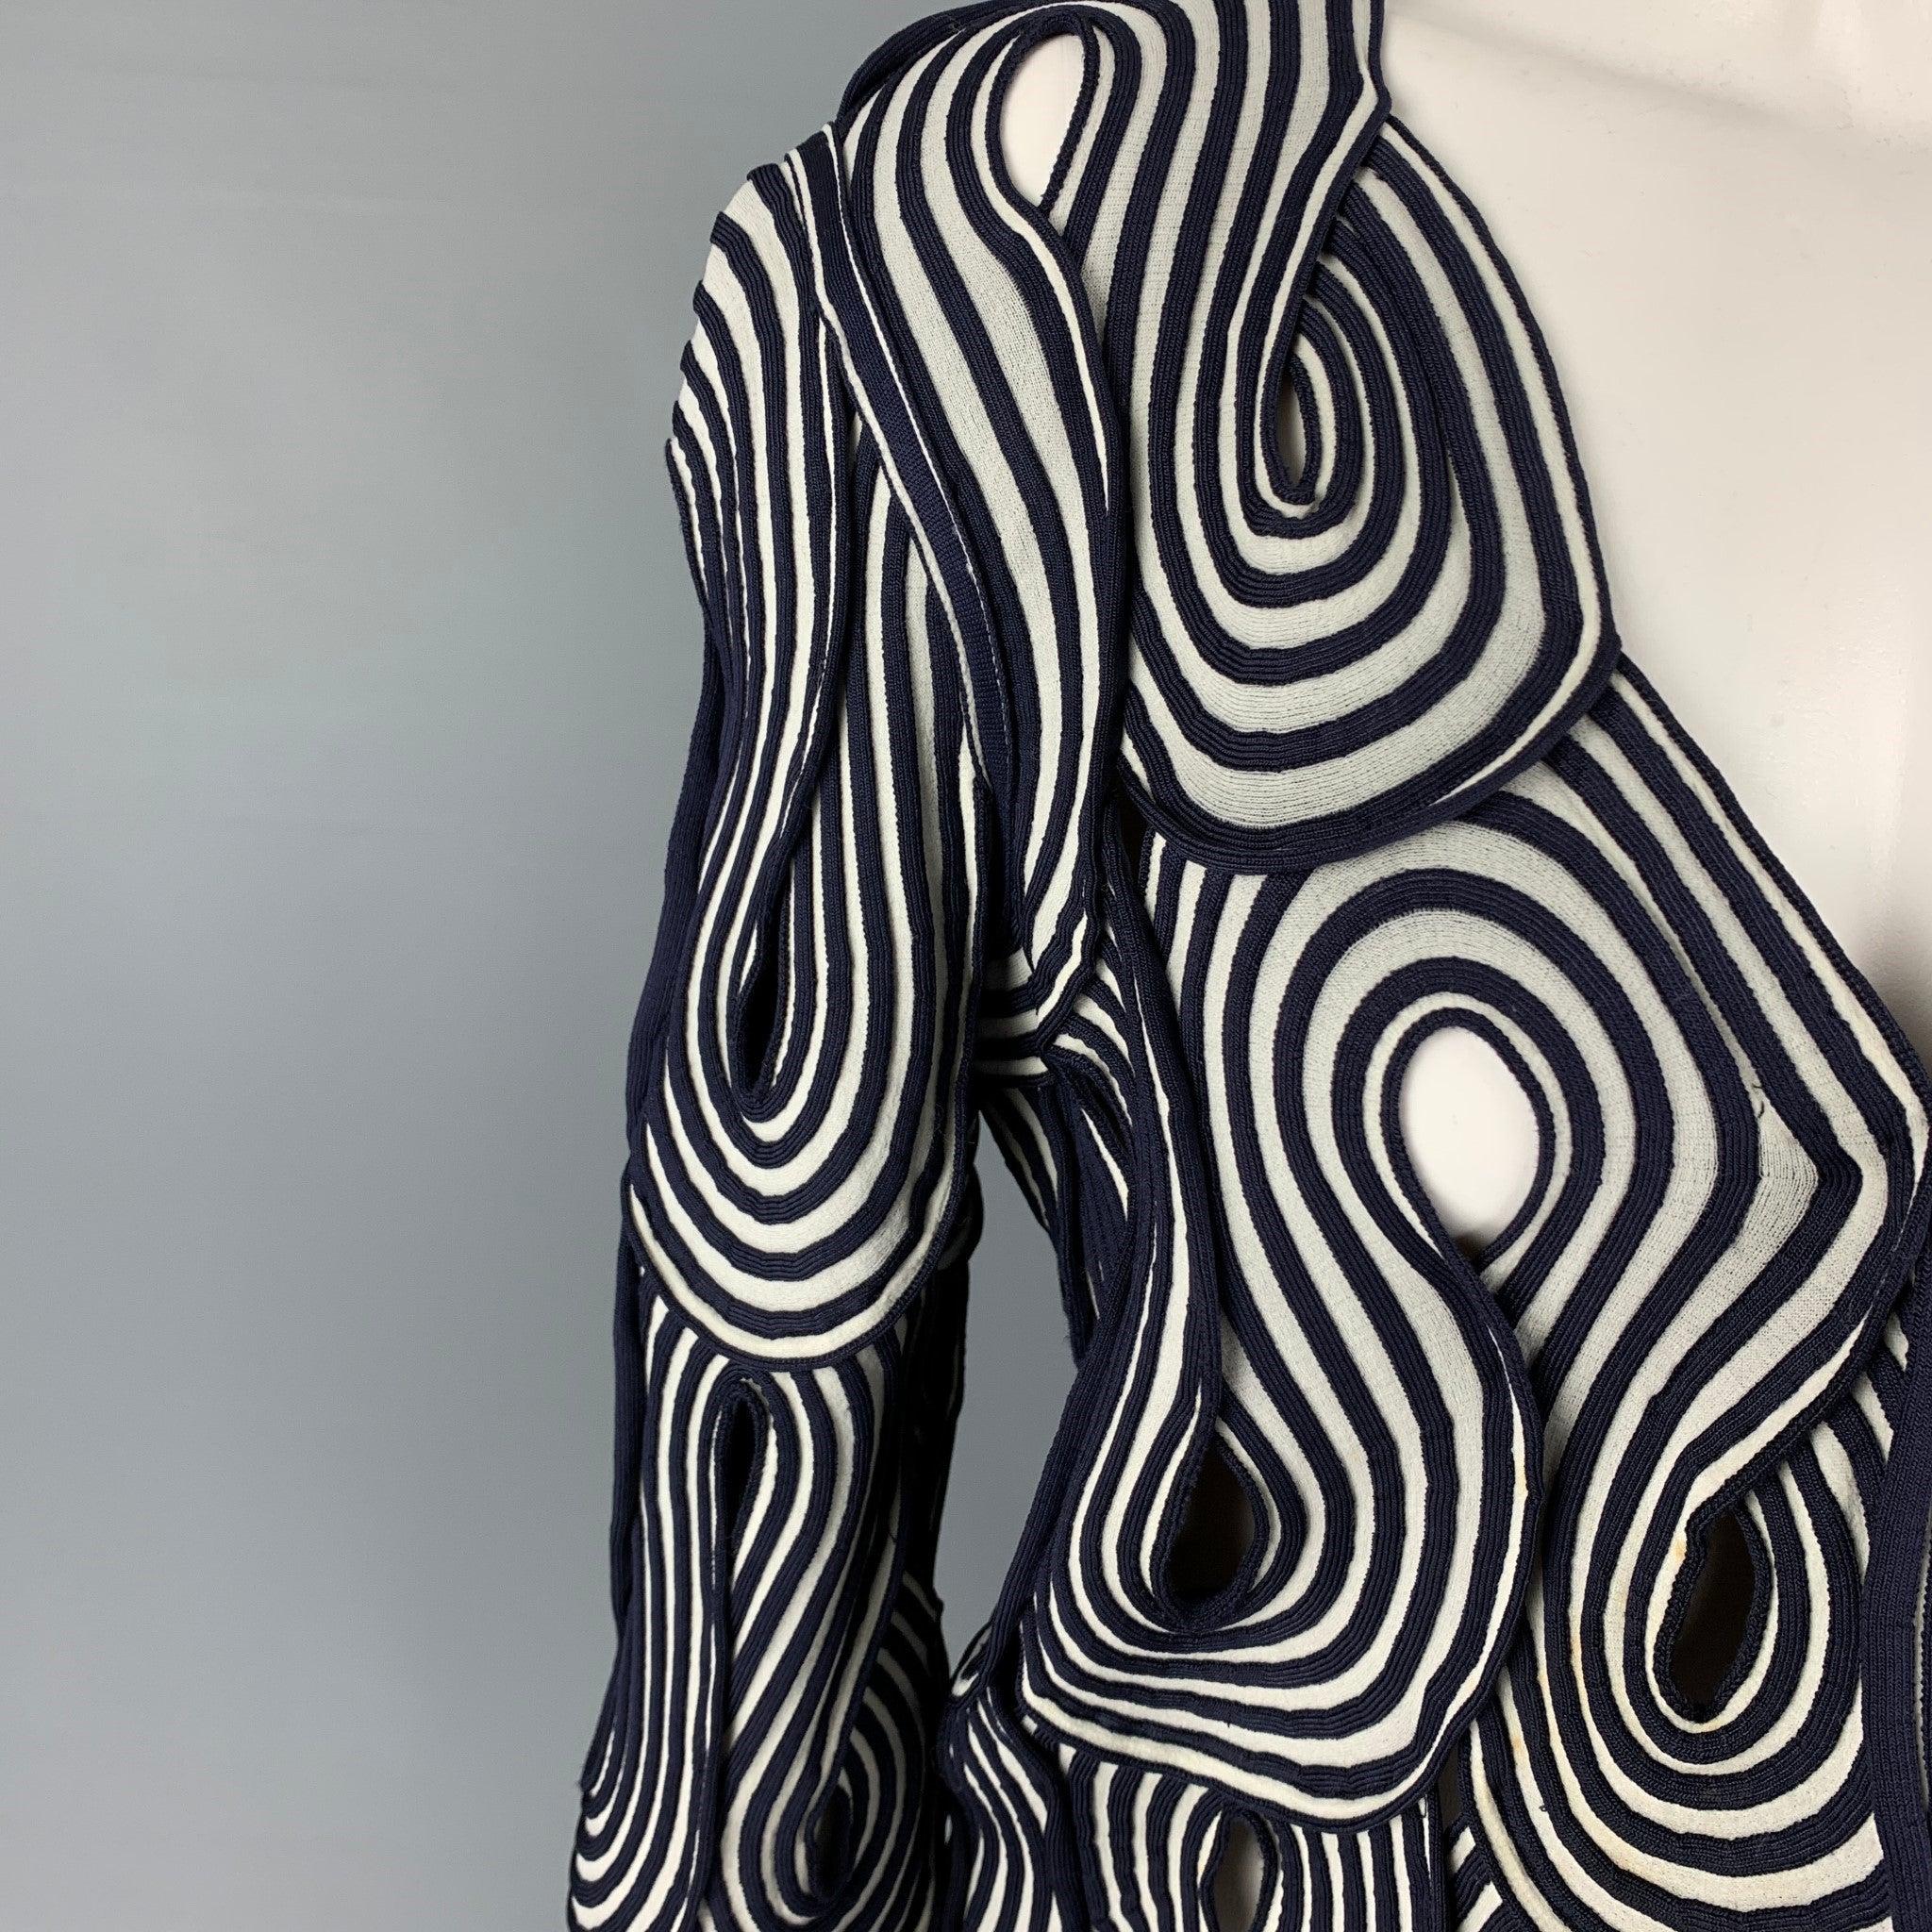 GIORGIO ARMANI jacket comes in a purple & white swirl print viscose / polyamide featuring long sleeves and a single button closure. Made in Italy.
 Very Good
 Pre-Owned Condition. 
 

 Marked:  40 
 

 Measurements: 
  
 Shoulder: 16 inches Bust: 34